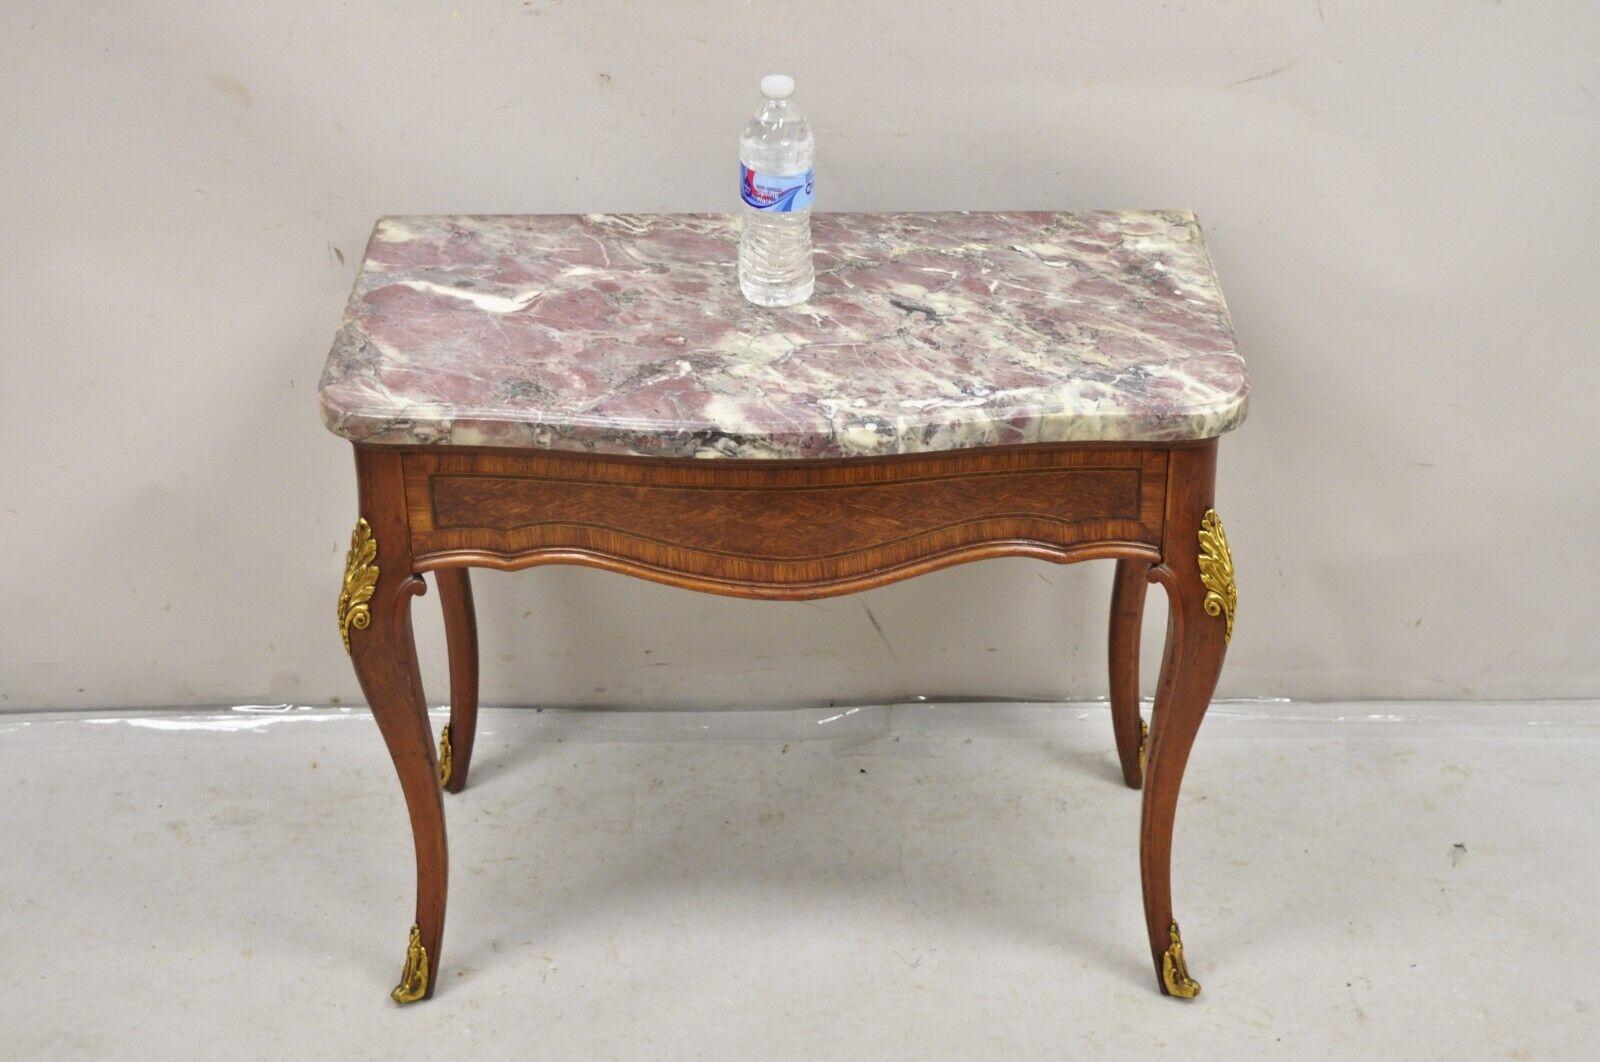 Vintage French Louis XV Style Rouge Marble Top Low Console Side Table with Drawer. Item features a shaped marble top with purple accents, single dovetailed drawer, shapely cabriole legs, bronze ormolu, very unique low console table. Circa 1920s.